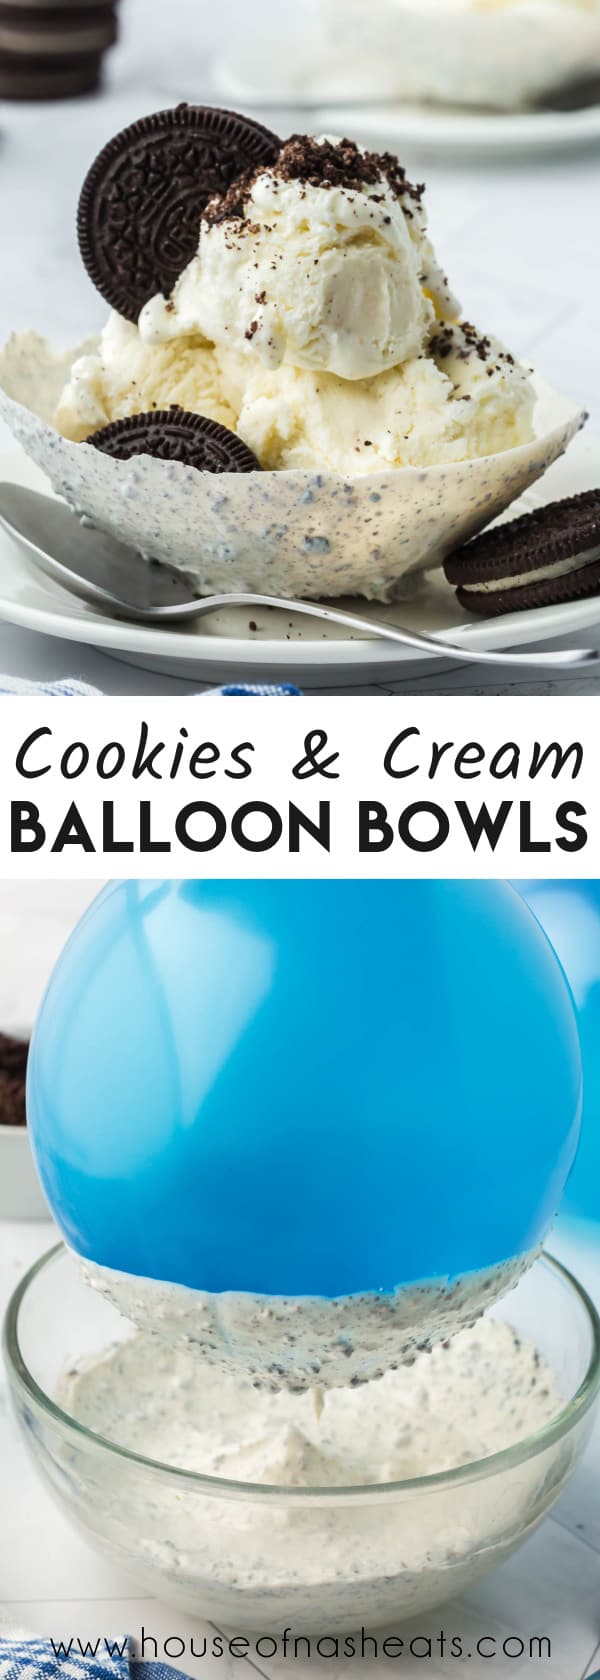 A collage of images showing Oreo balloon bowls with text overlay.